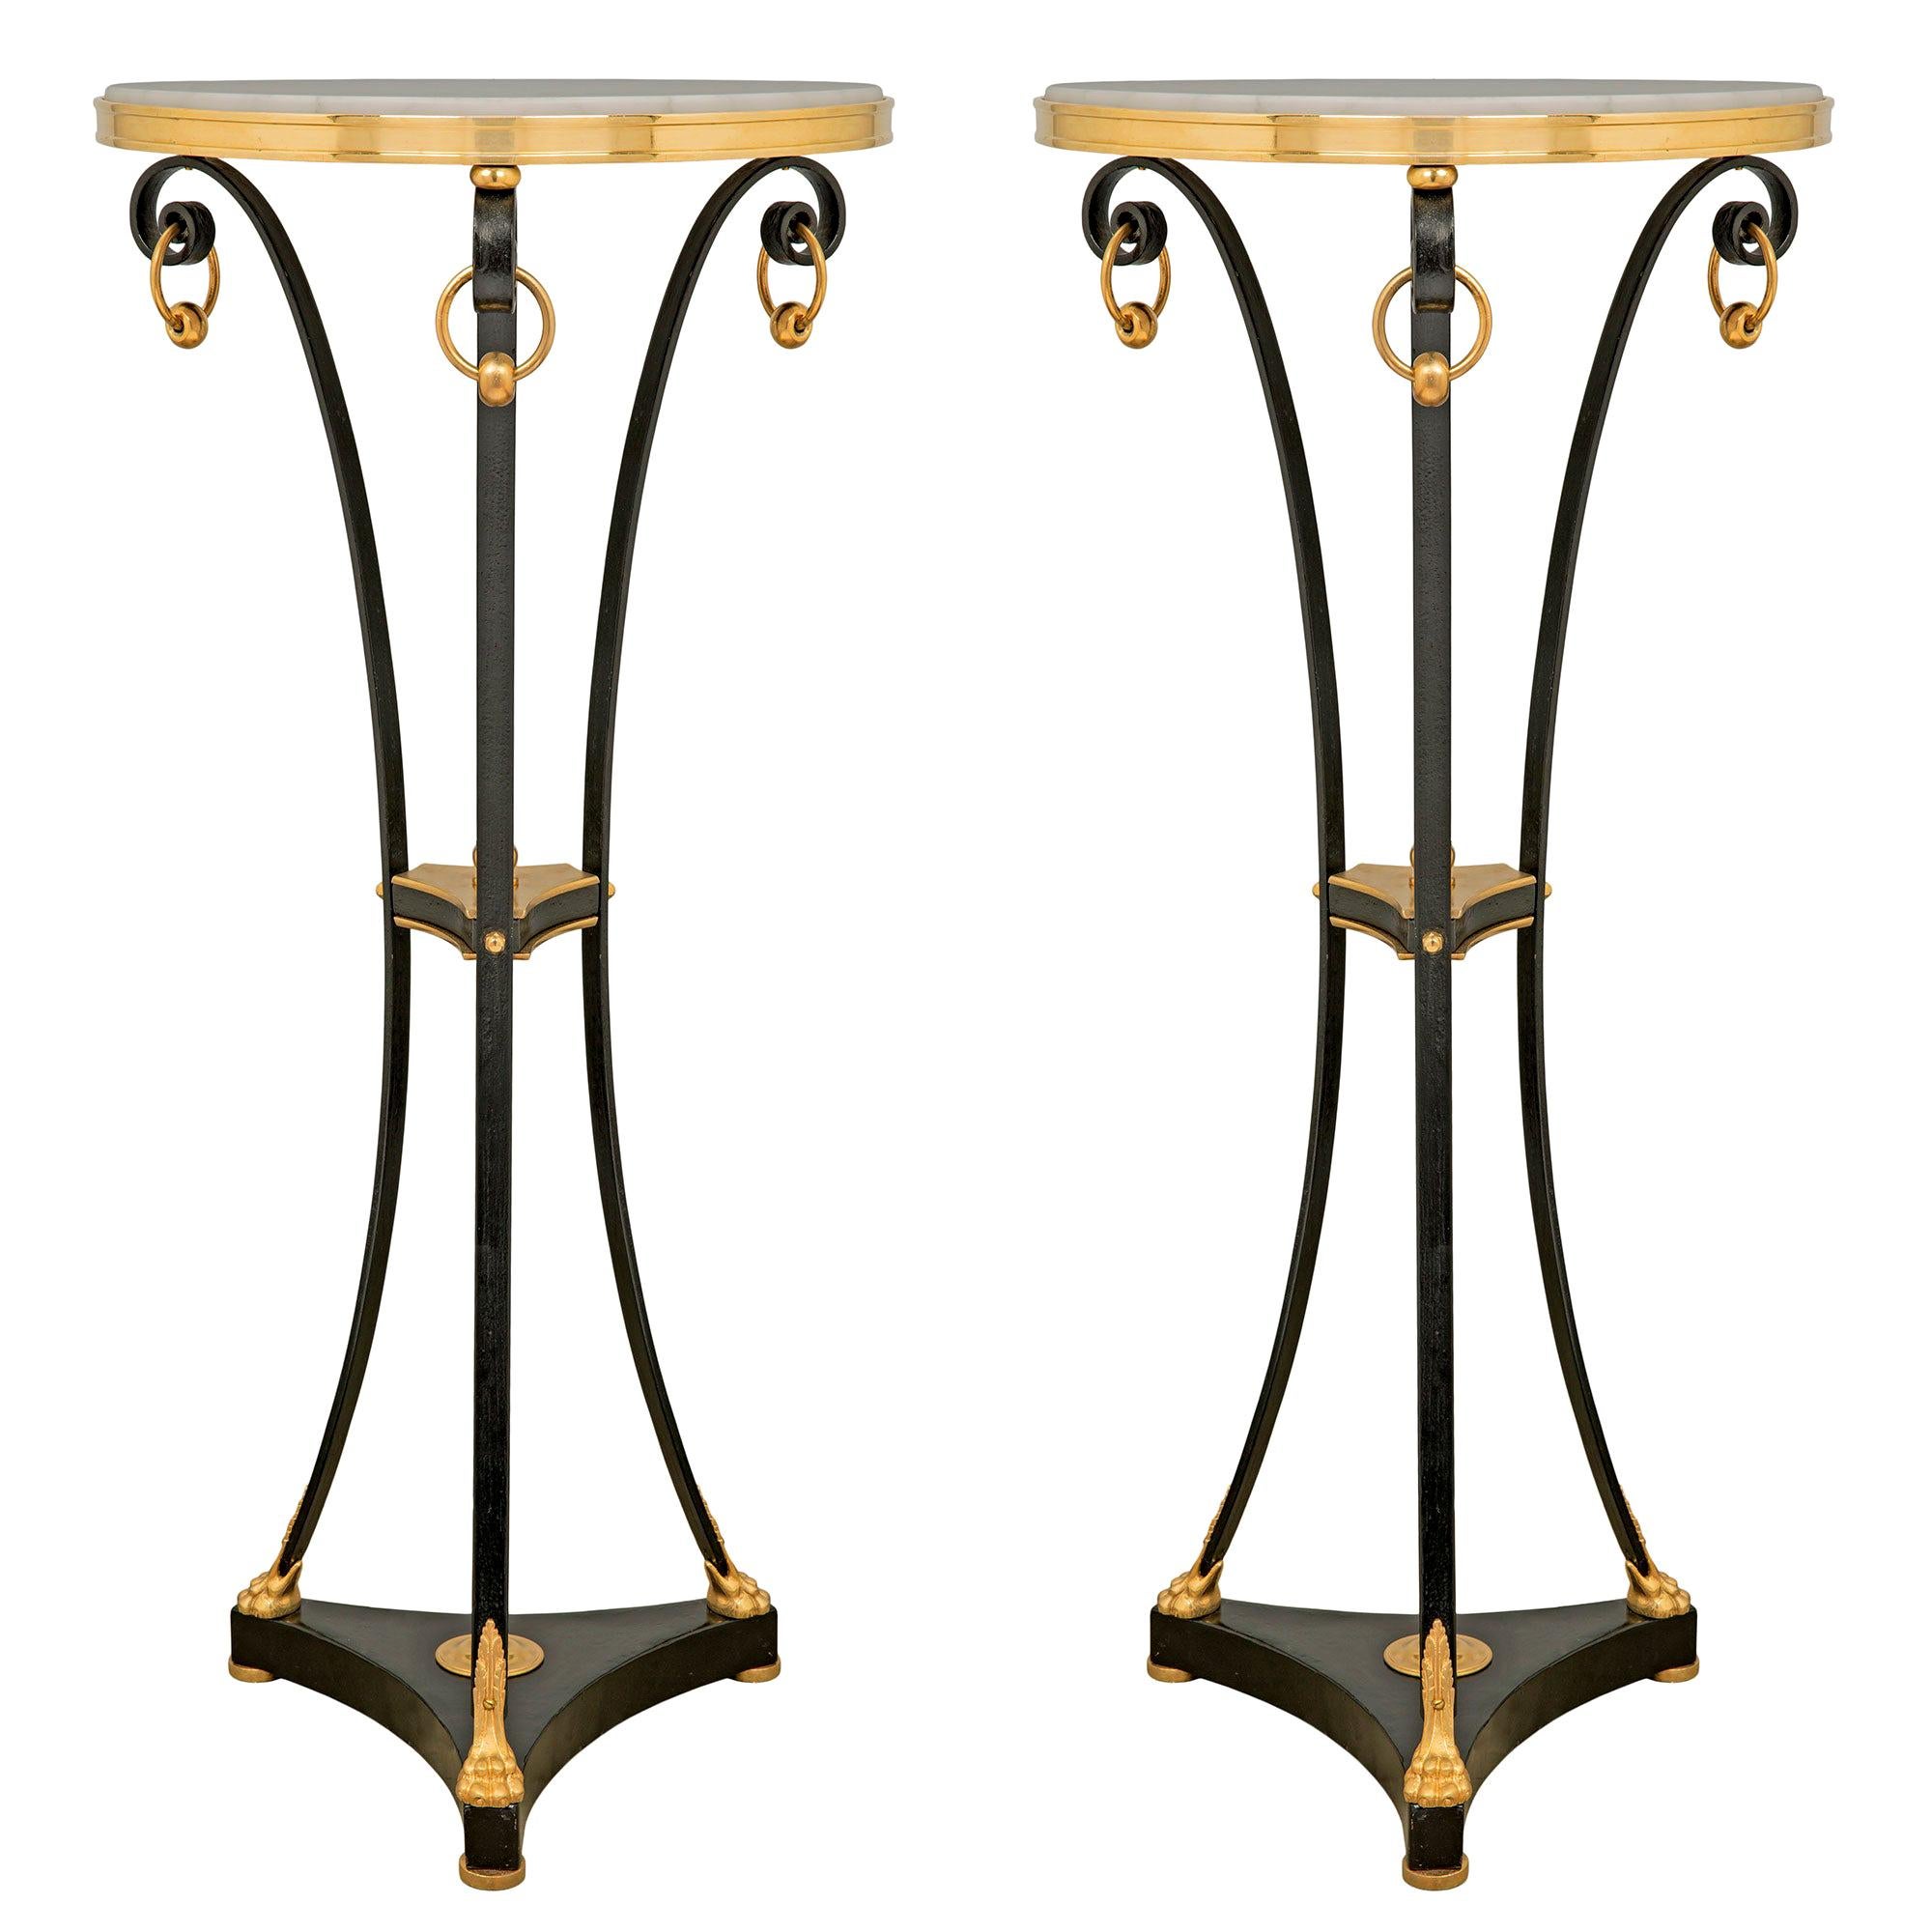 Pair of French Louis XVI Style Bronze, Ormolu and Marble Gueridon Side Tables